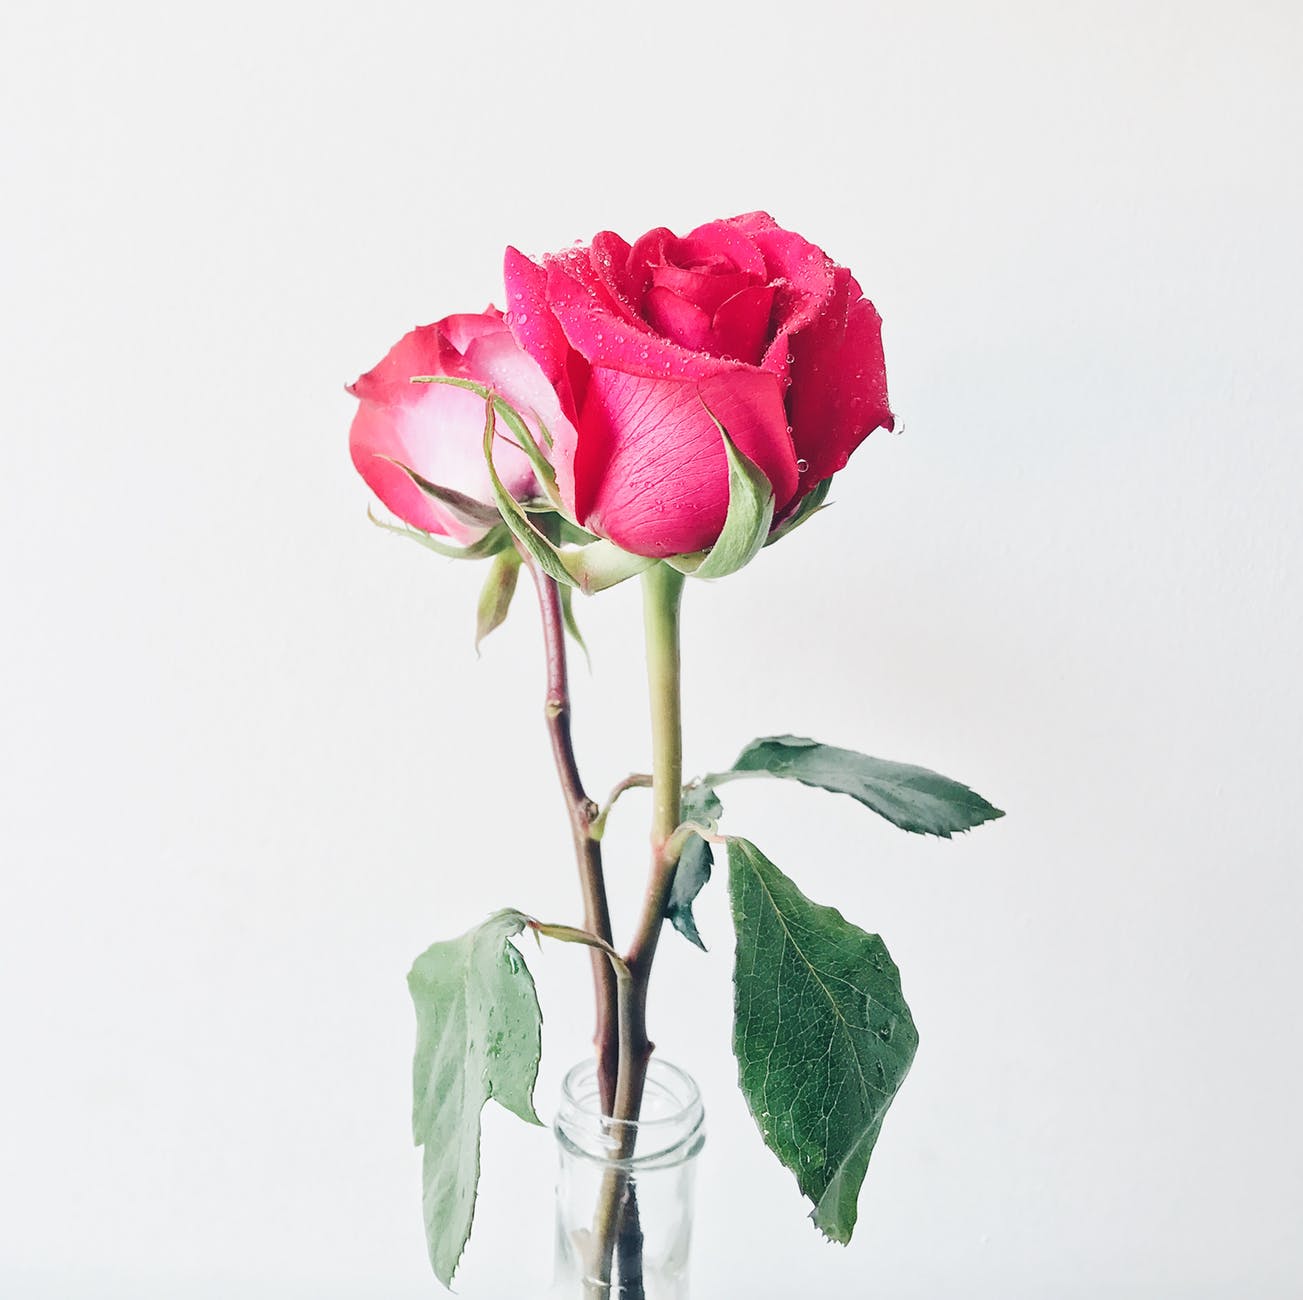 photo of pink roses in vase